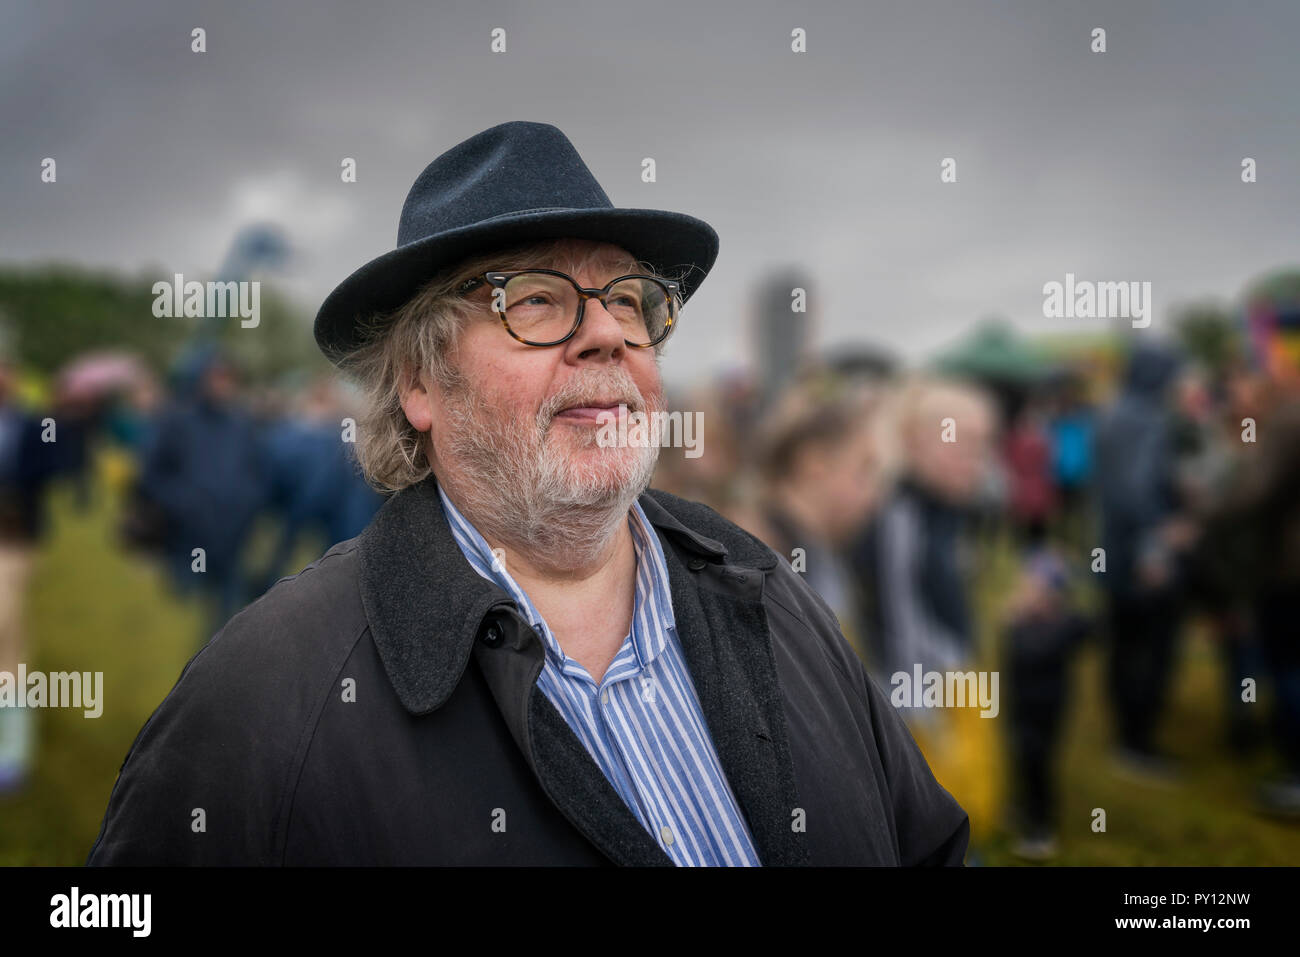 Portrait of a man with hat and glasses, celand's independence day, Reykjavik, Iceland Stock Photo